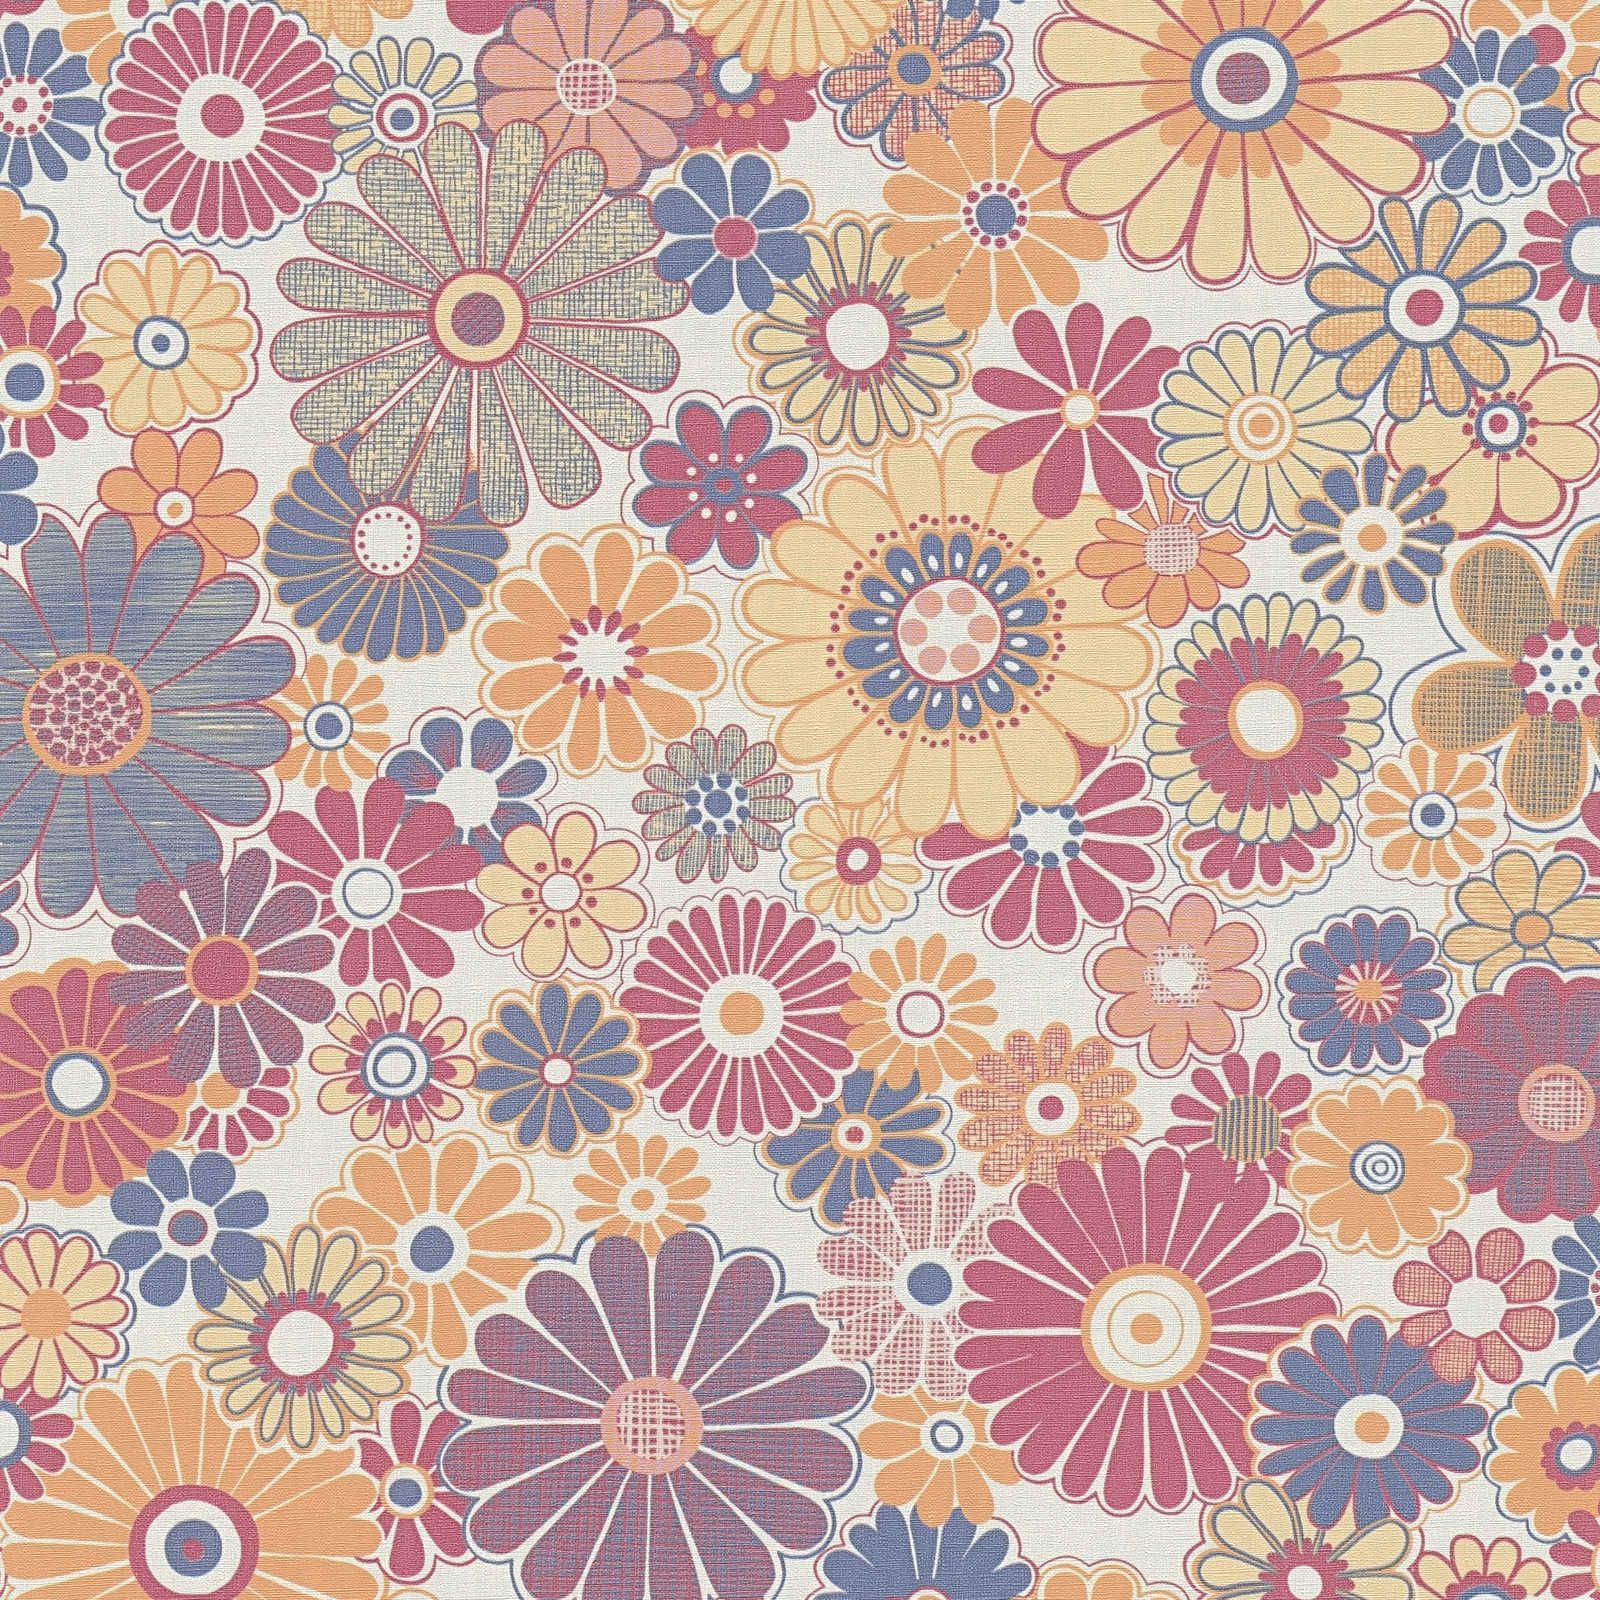 Retro non-woven wallpaper with floral pattern - red, blue, orange
